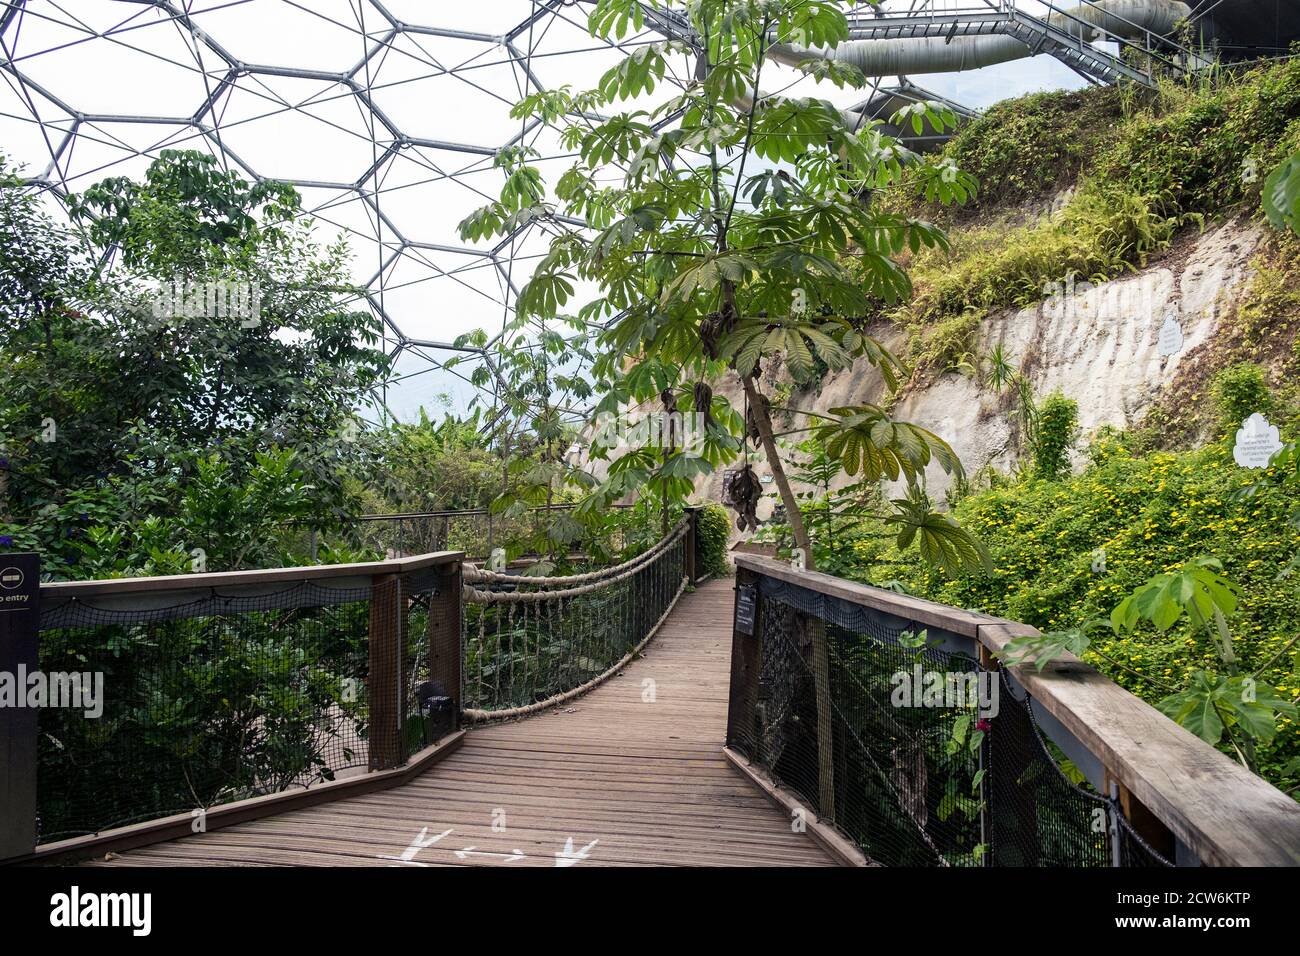 Sub tropical plants and trees inside the rainforest Biome at the Eden project complex in Cornwall. Stock Photo